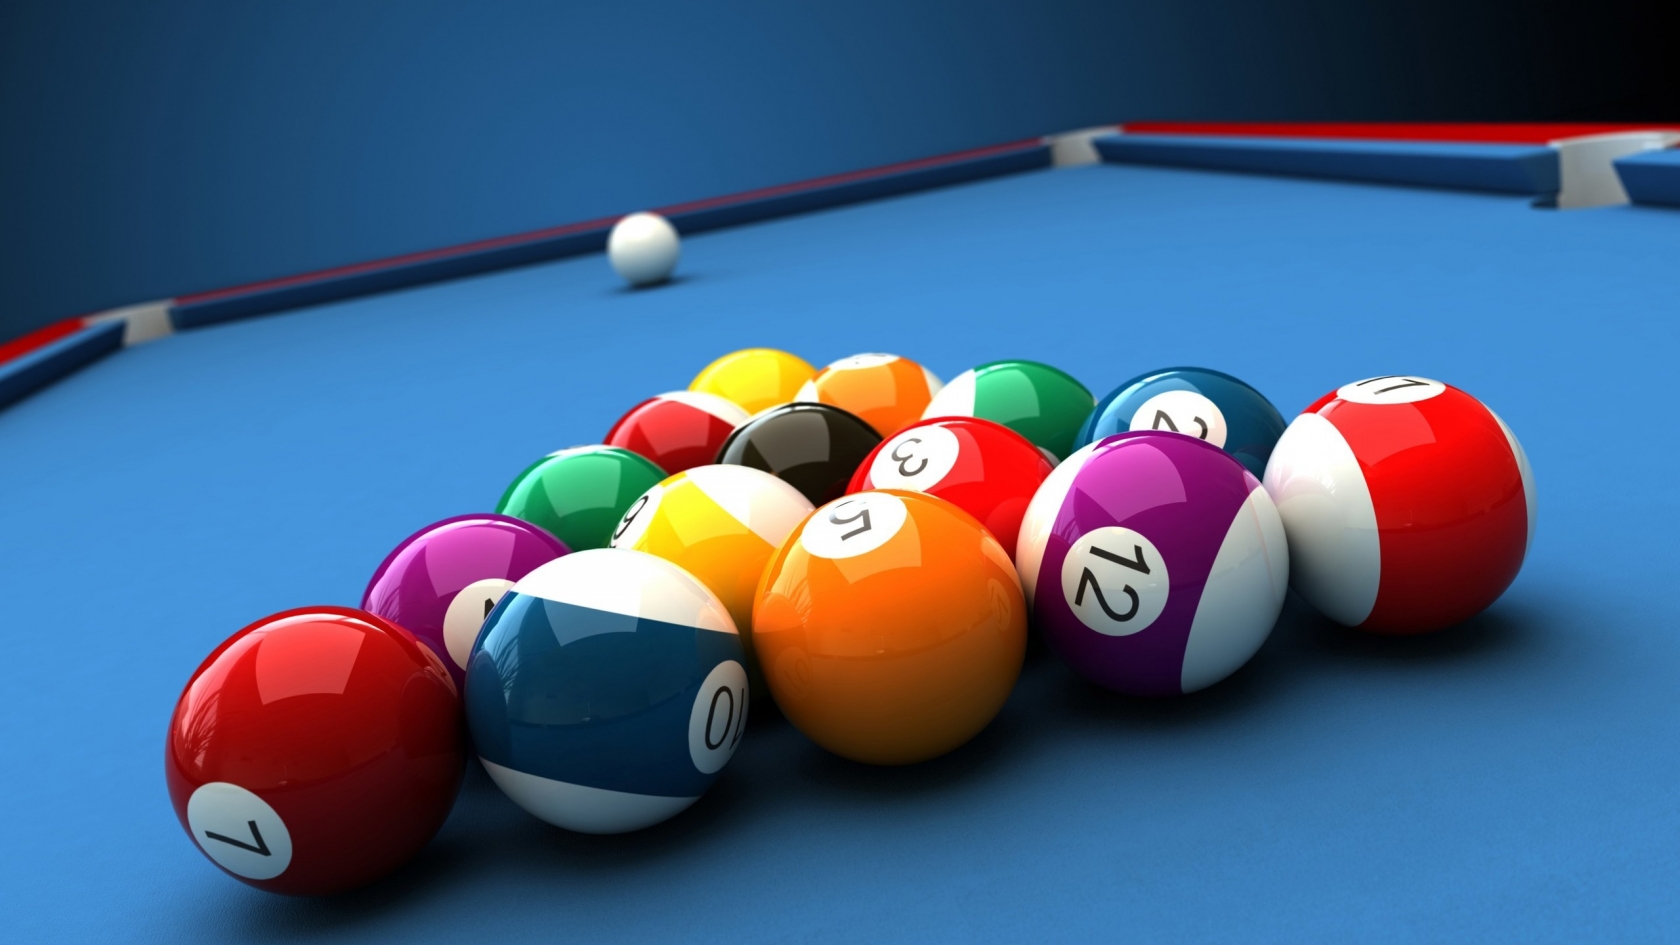 Billiards Table and Balls for 1680 x 945 HDTV resolution